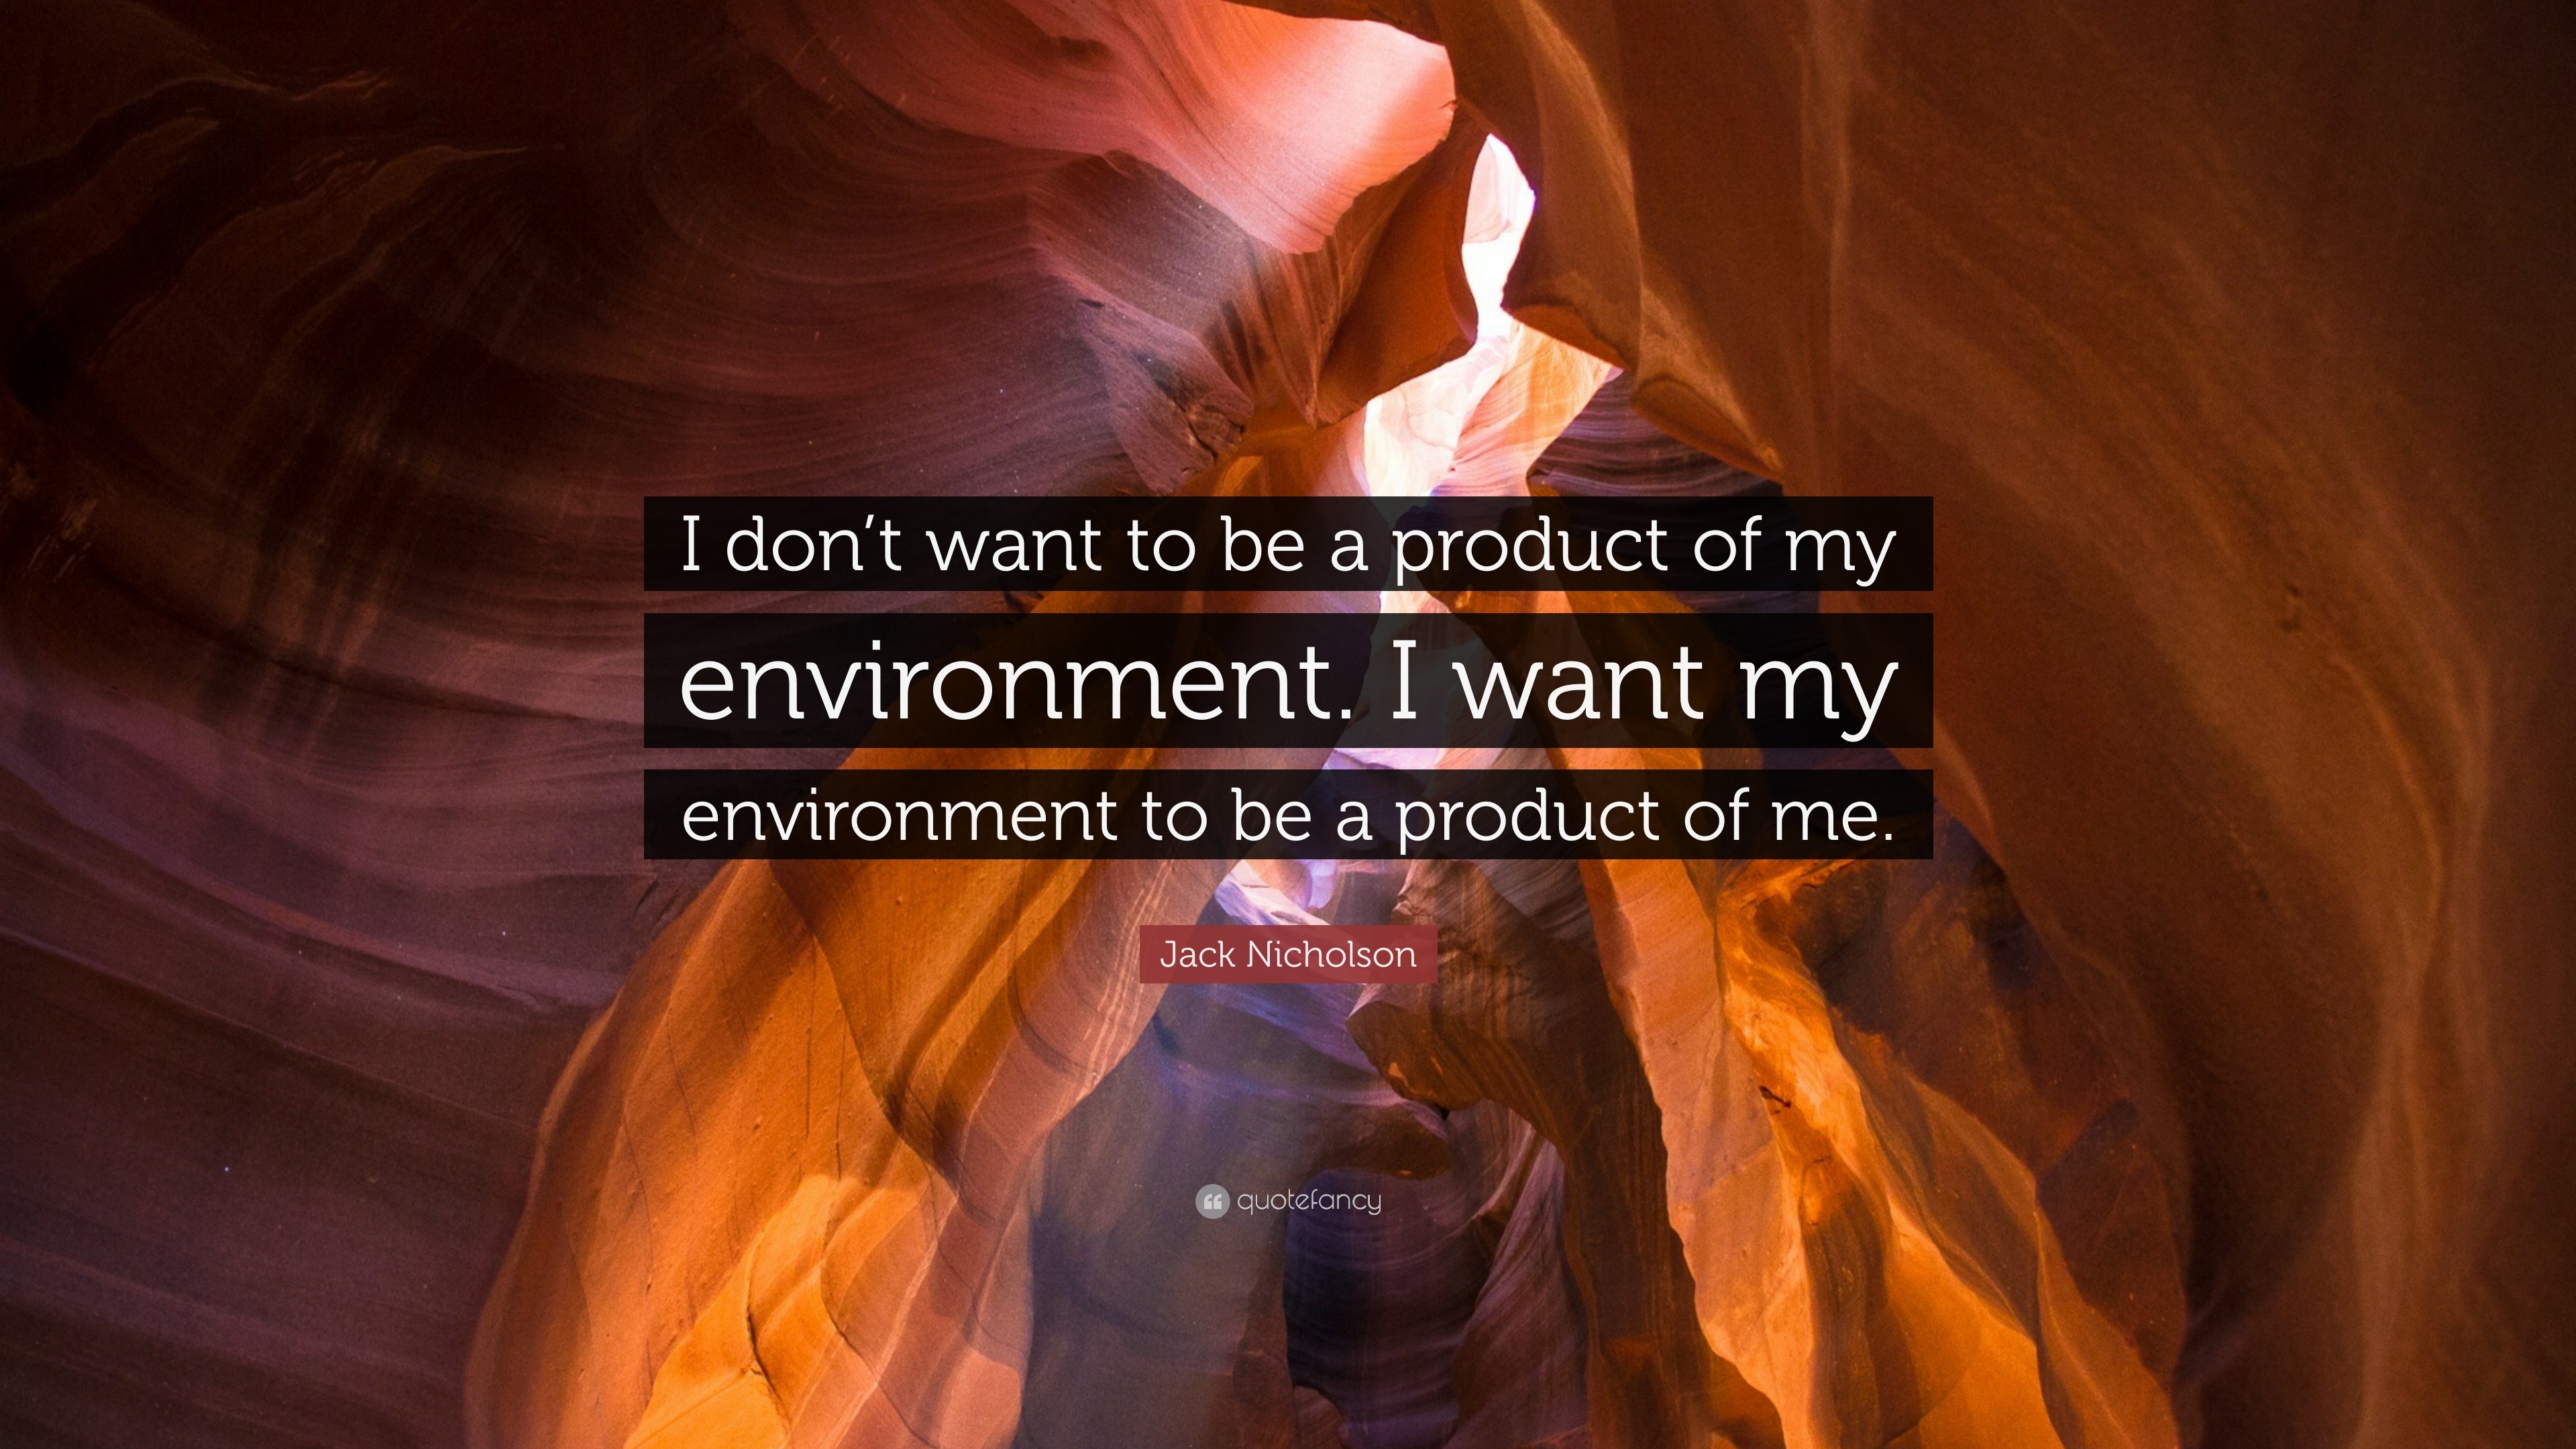 Jack Nicholson Quote: “I don’t want to be a product of my environment